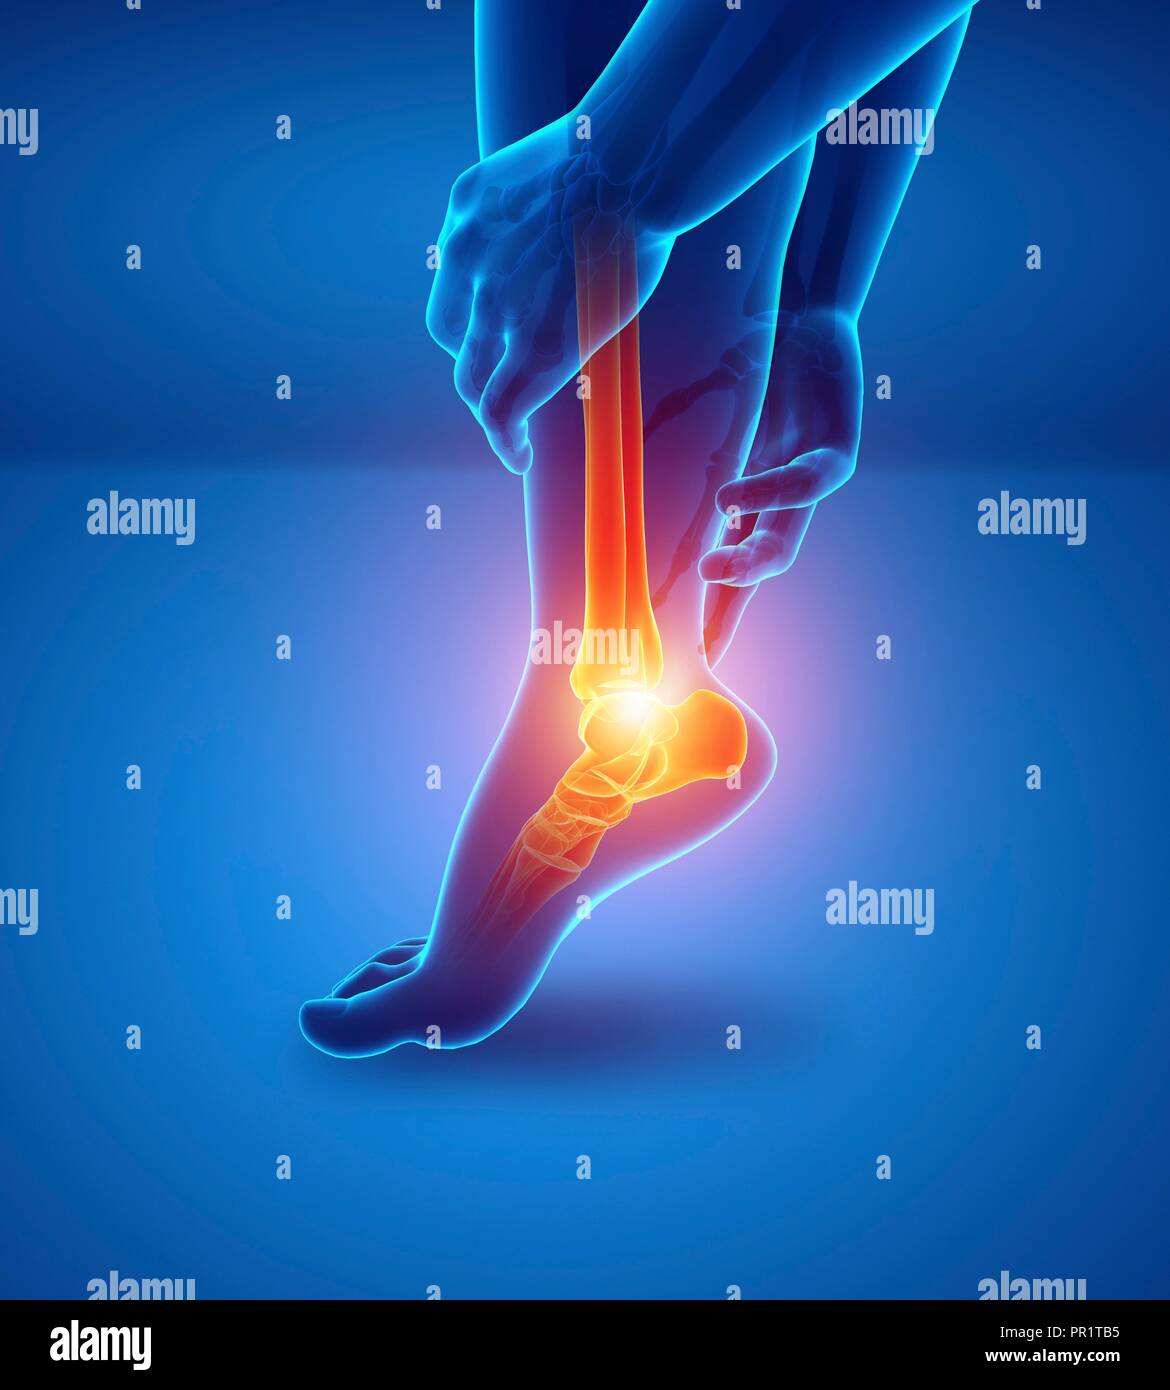 Man with foot pain, computer illustration. Stock Photo